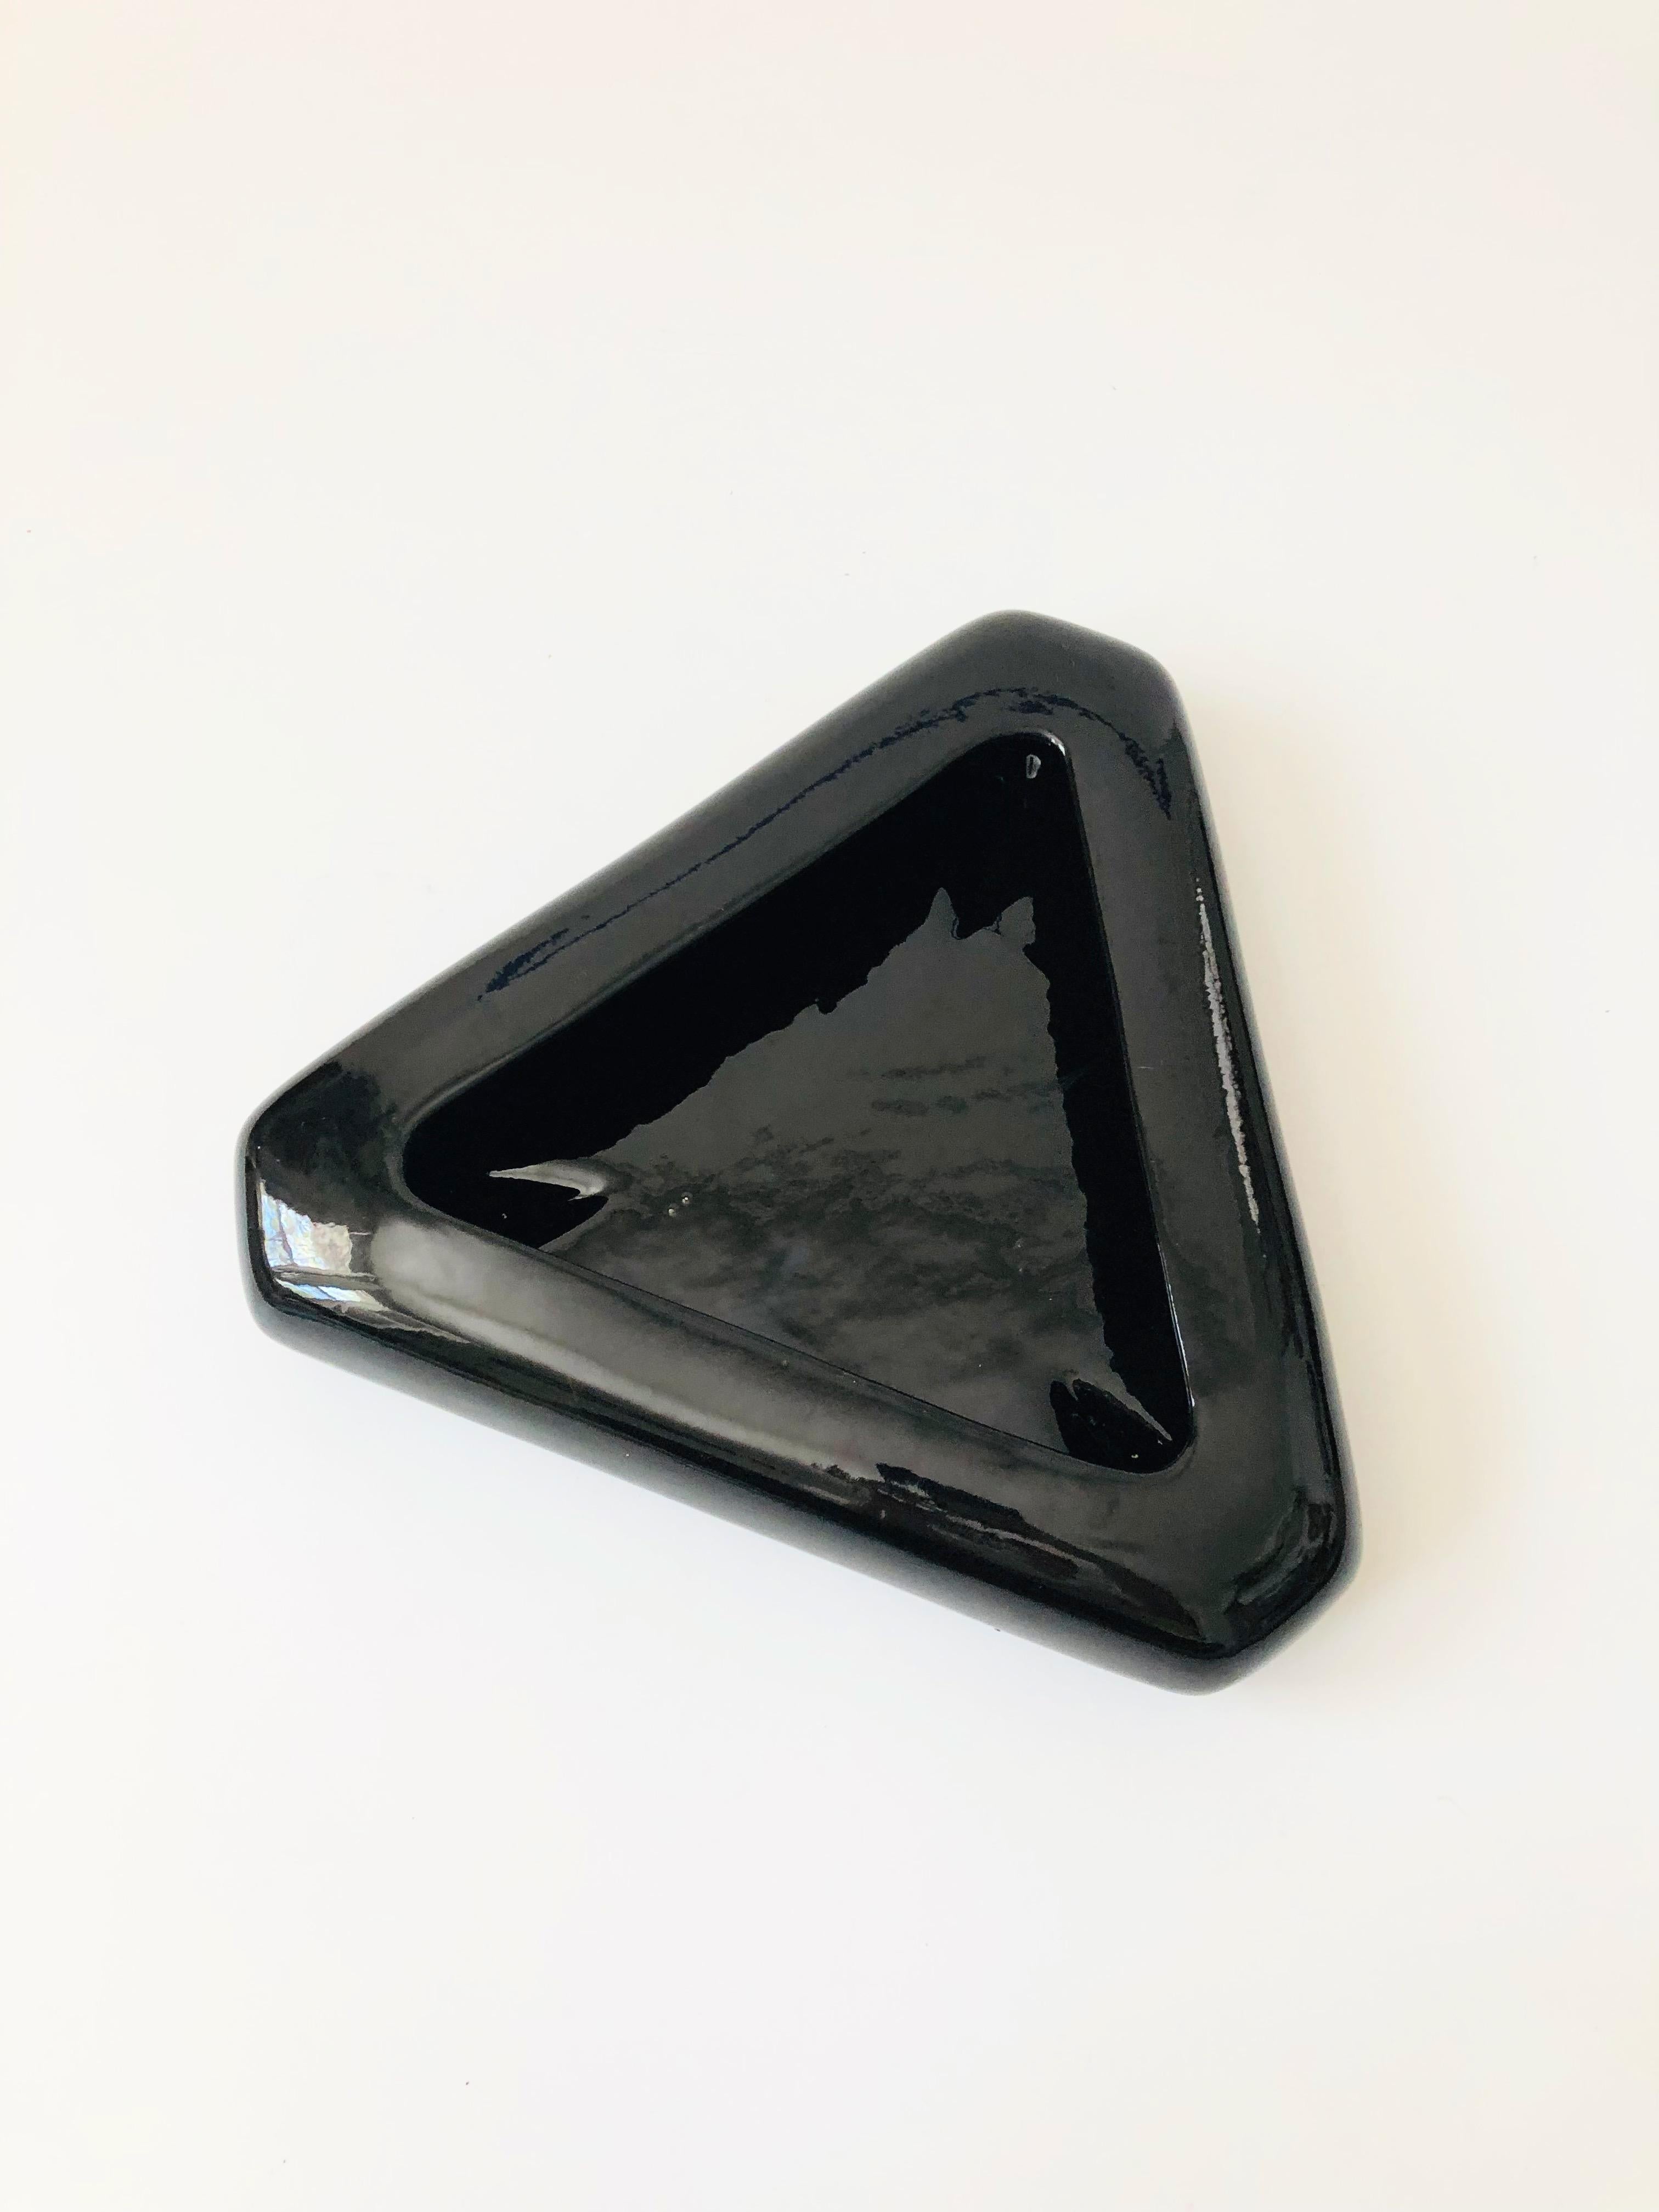 A vintage 1980s triangular ceramic tray. Nice large shallow size, finished in a glossy black glaze. Perfect for keeping small items in place or could be used as a shallow planter bowl. Made in the USA by Coronet Ceramics.
    